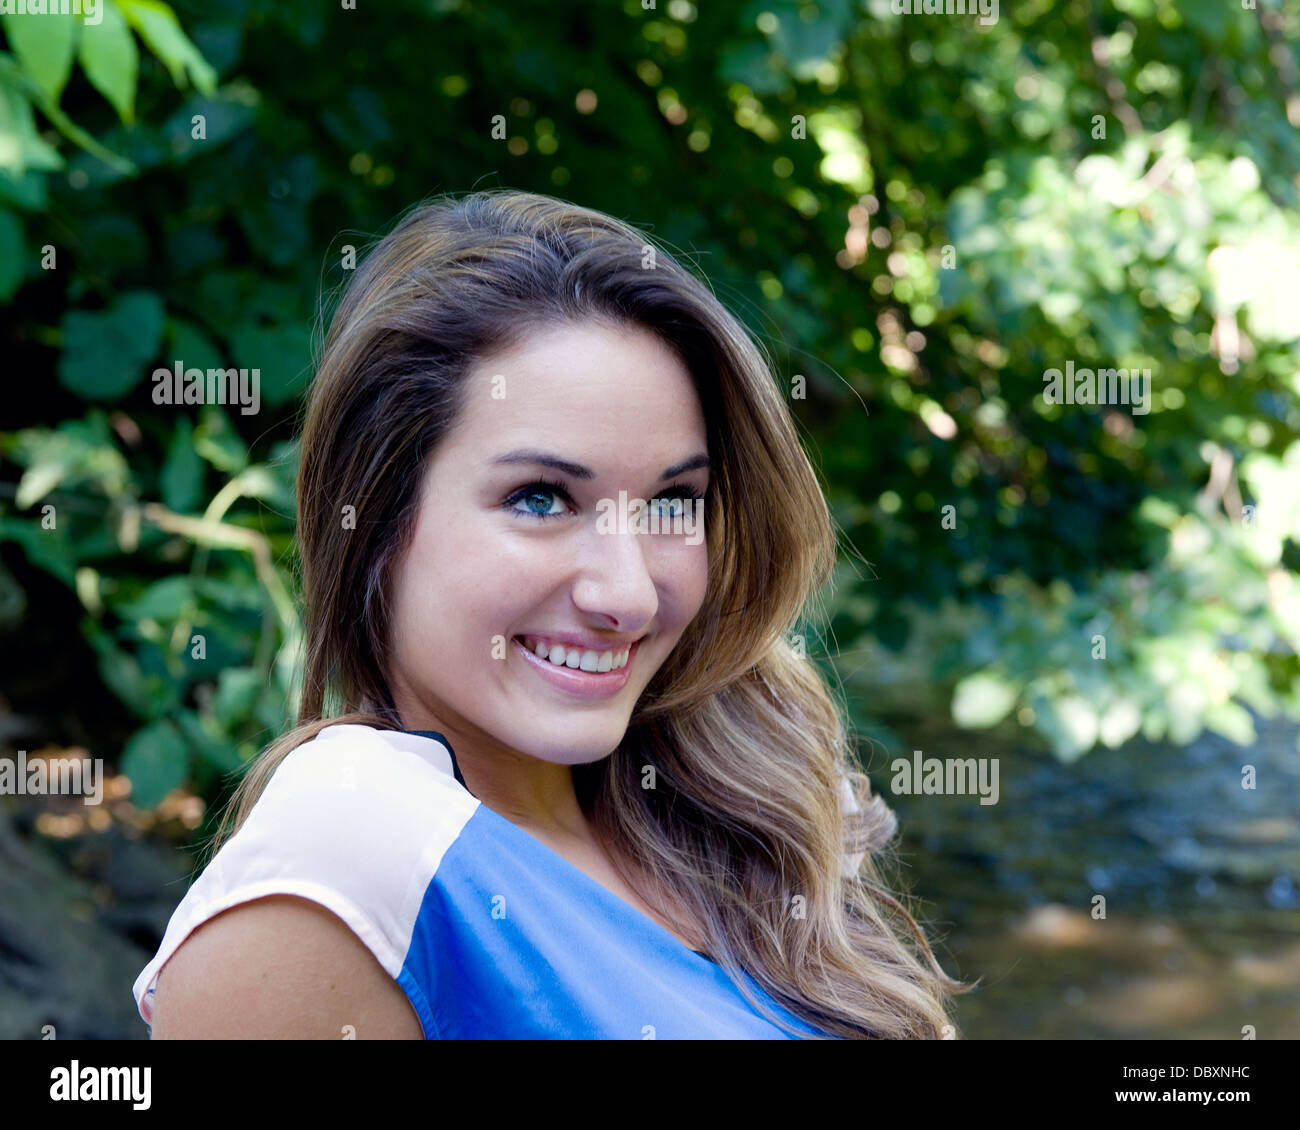 Head and shoulders of an attractive woman smiling while sitting outside on a summer day. Stock Photo